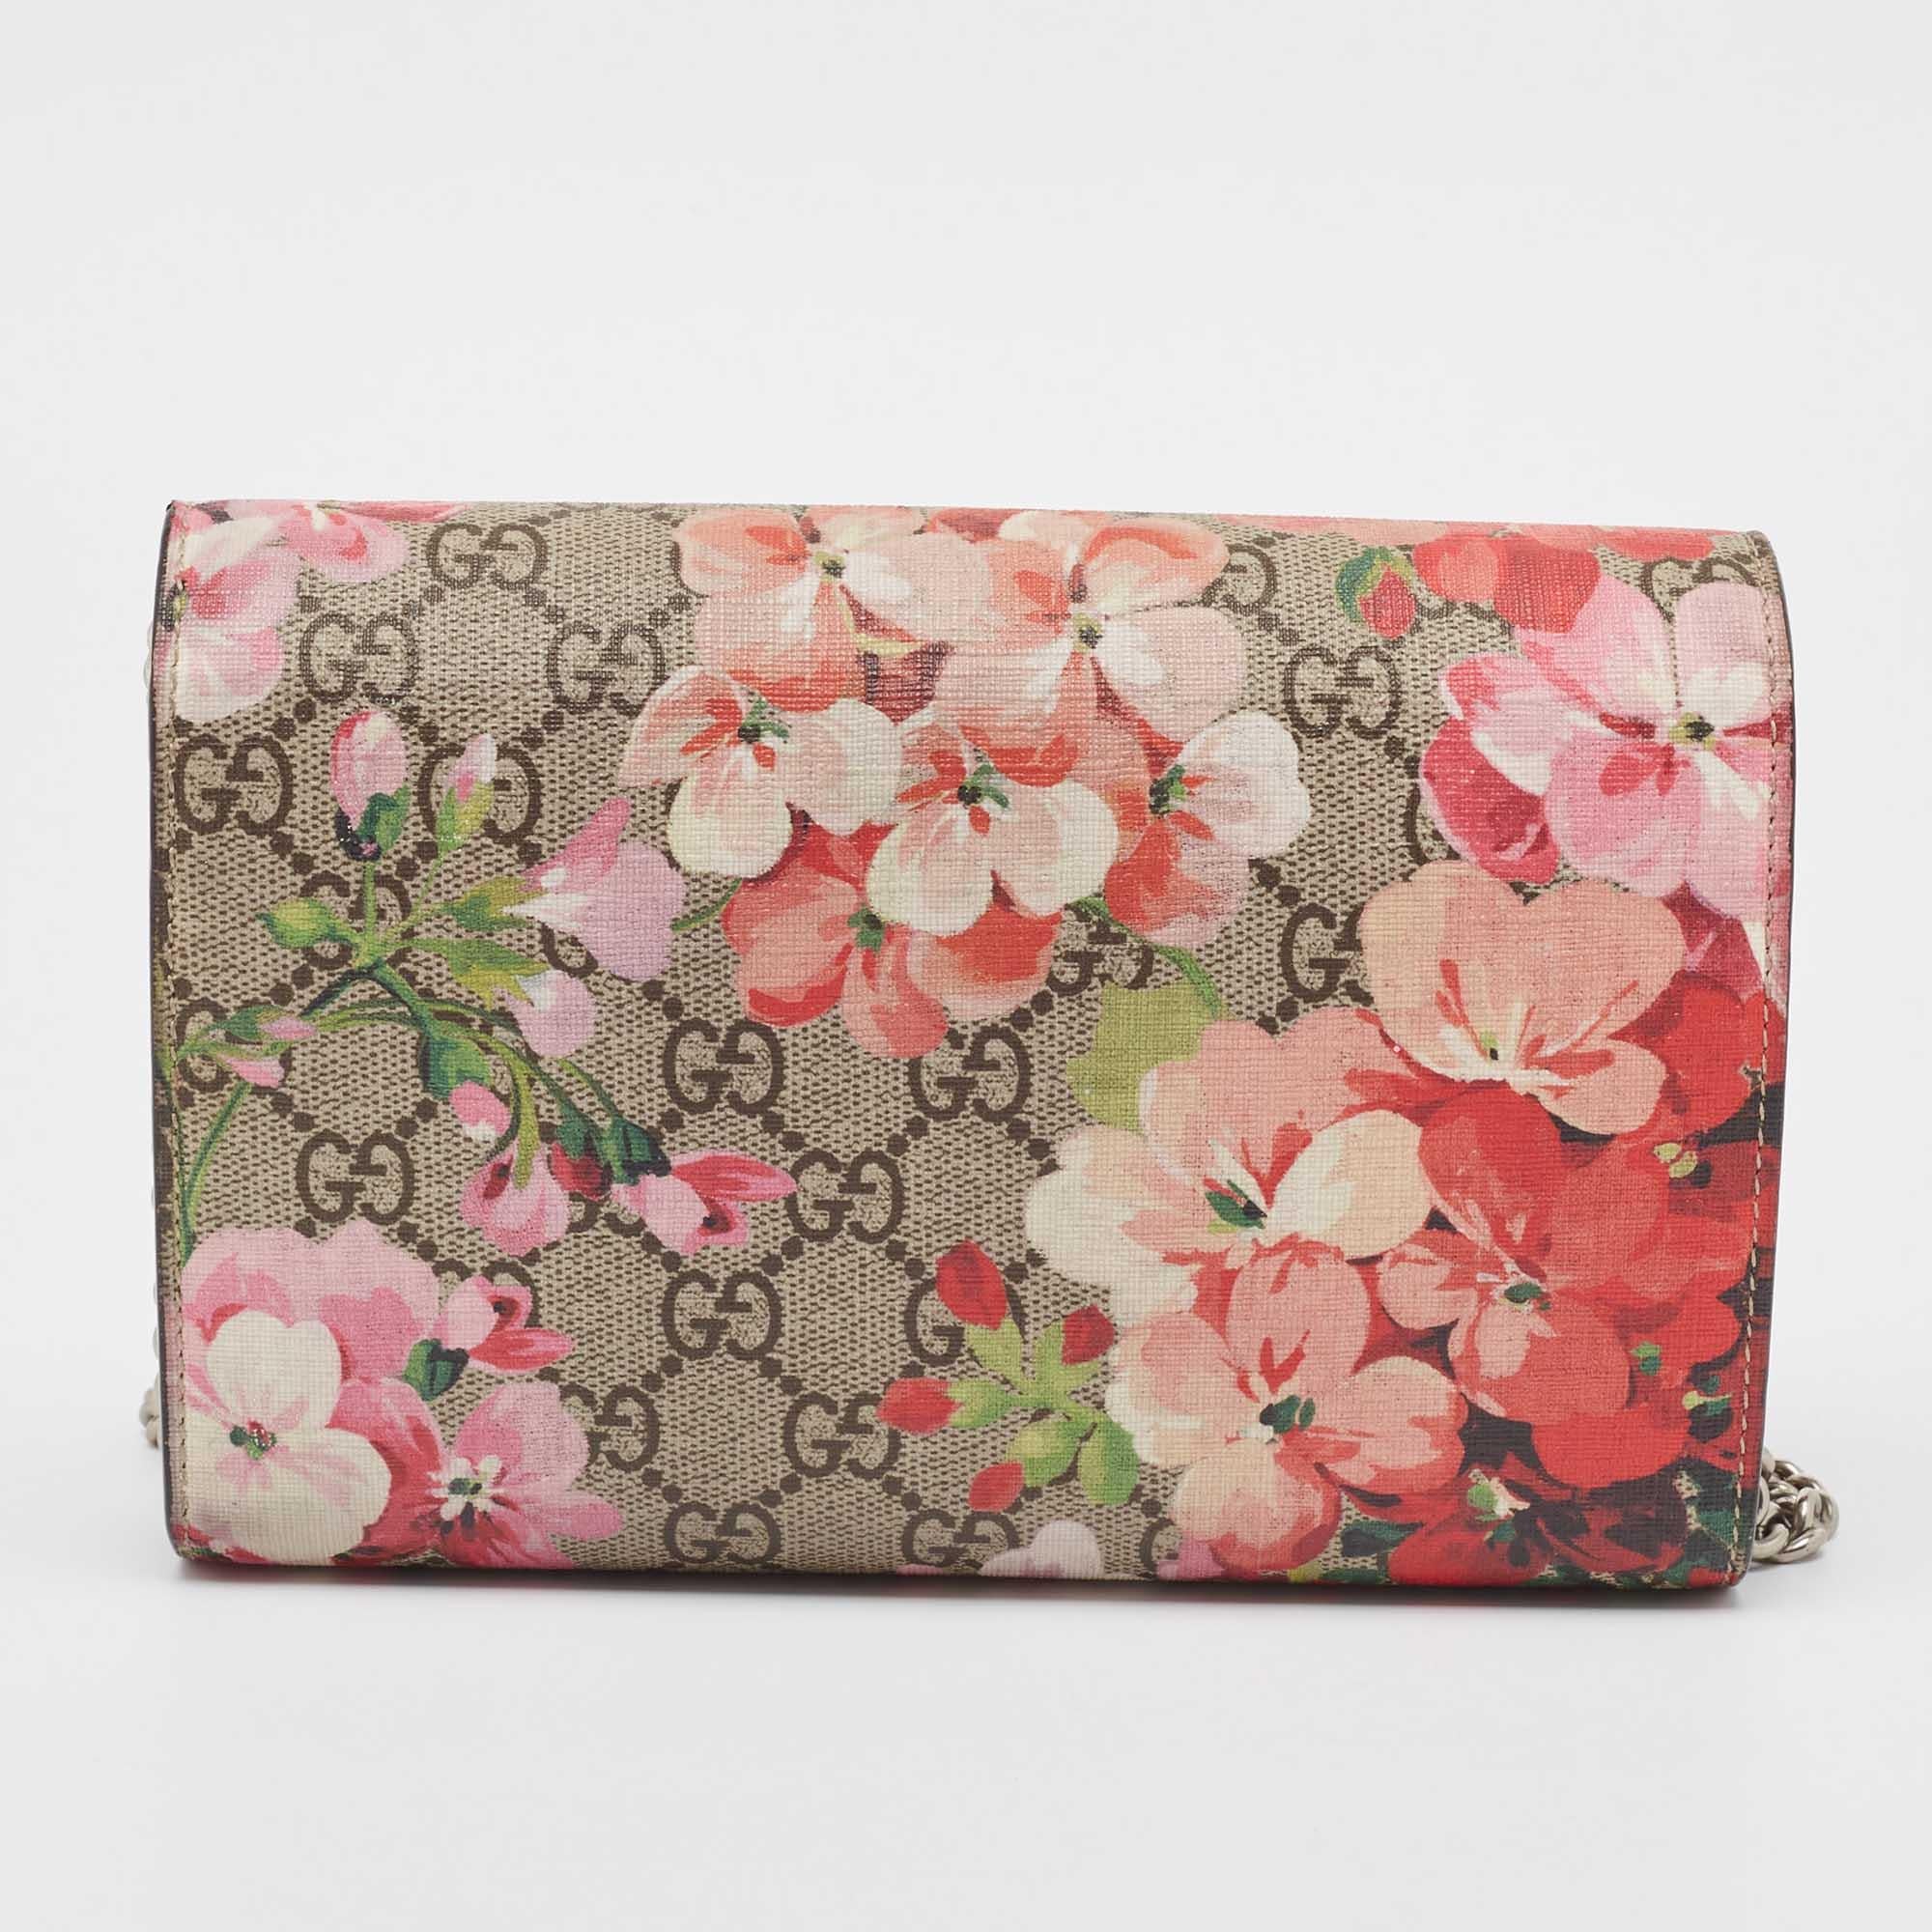 Picture yourself swinging this gorgeous wallet at your outings with friends or at social gatherings and imagine how it will not only complement all your outfits but fetch you endless compliments. This Gucci creation has been beautifully crafted from